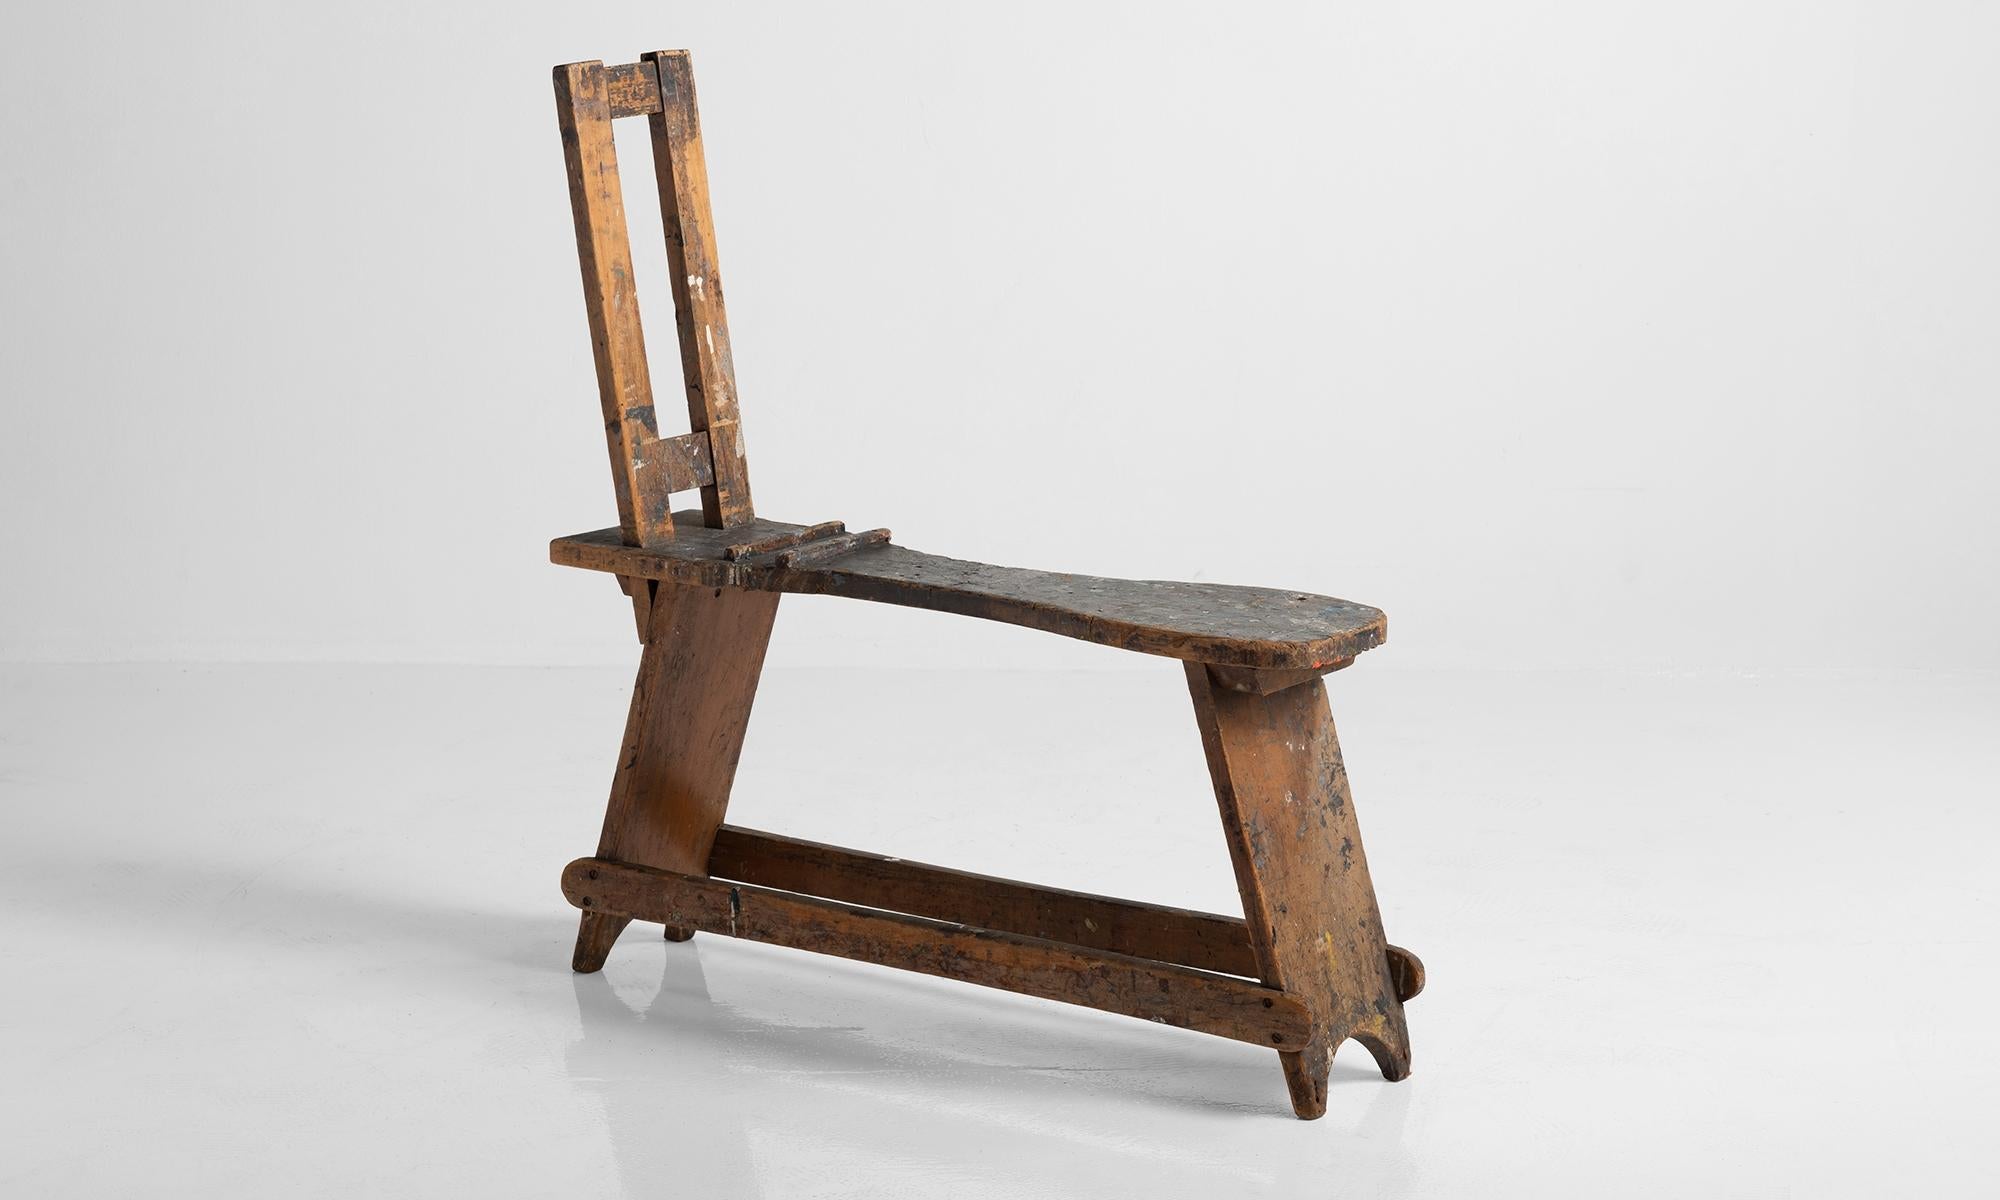 Artists Jockey France, 19th century.

Artists studio work bench/easel with attractive form and lovely paint splatter.